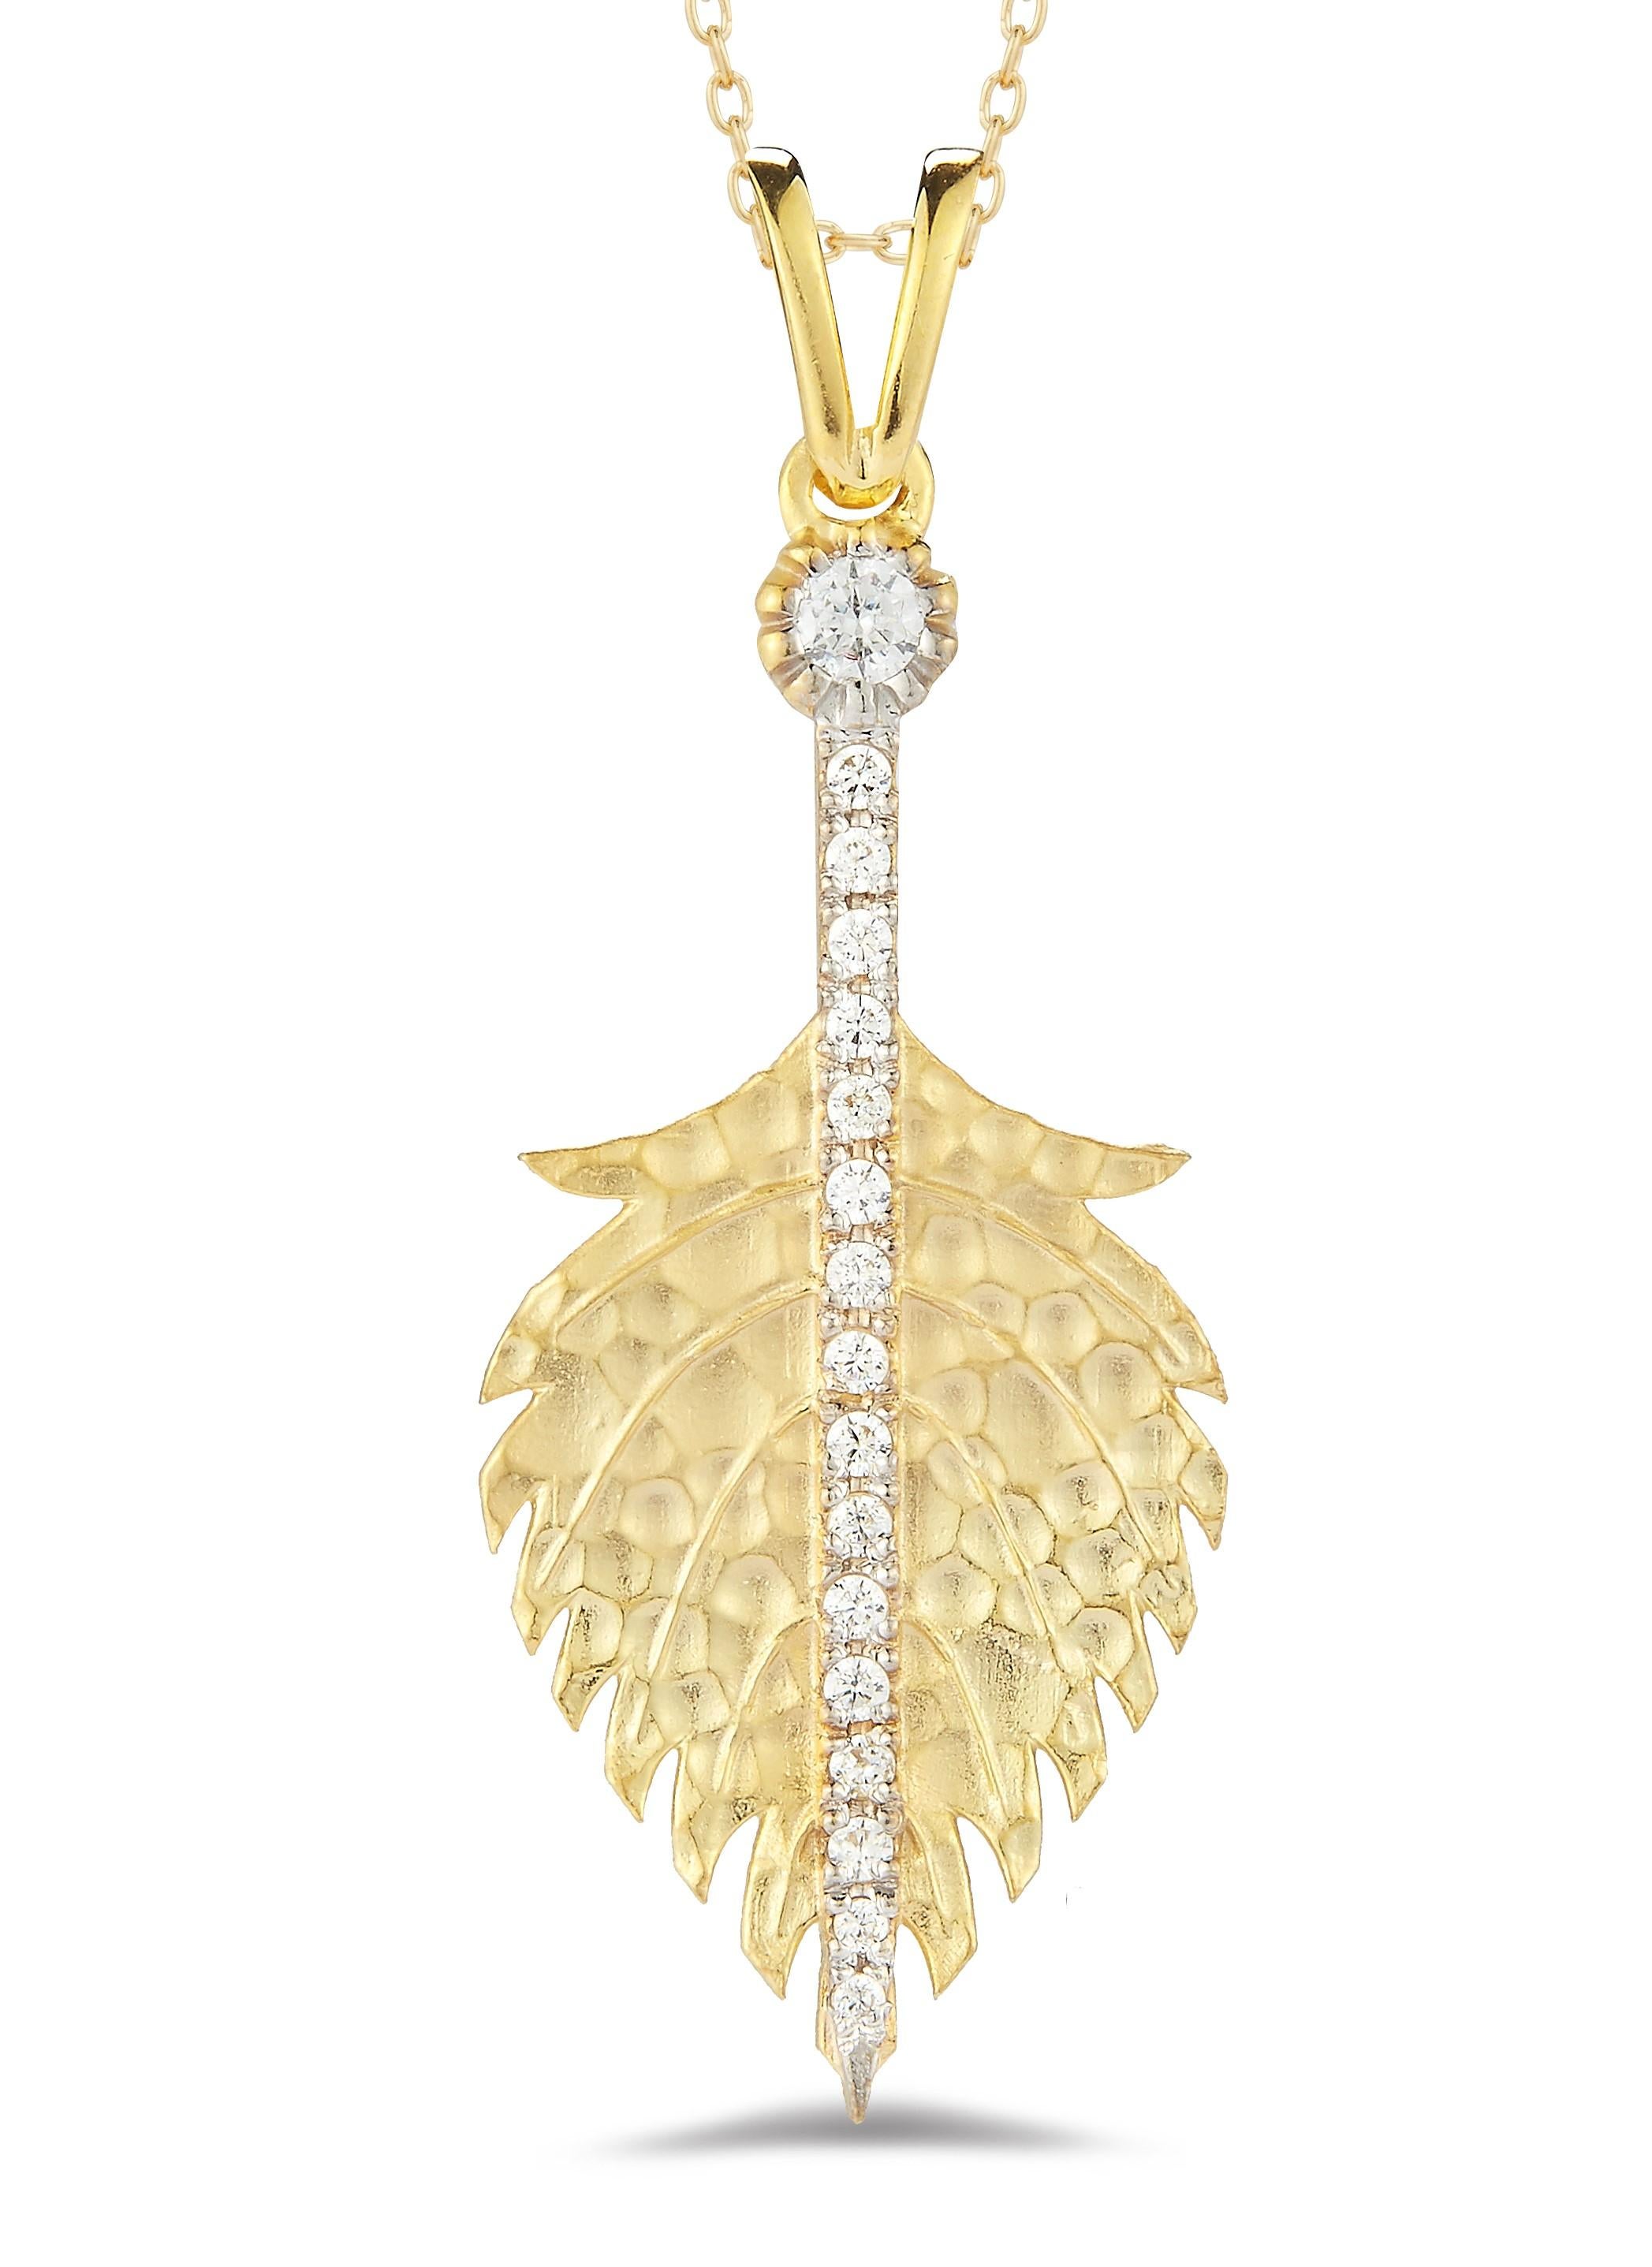 14 Karat Yellow Gold Hand-Crafted Matte and Hammer-Finished Feather Pendant, Accented with 0.14 Carats of Pave Set Diamonds, Sliding on a 16